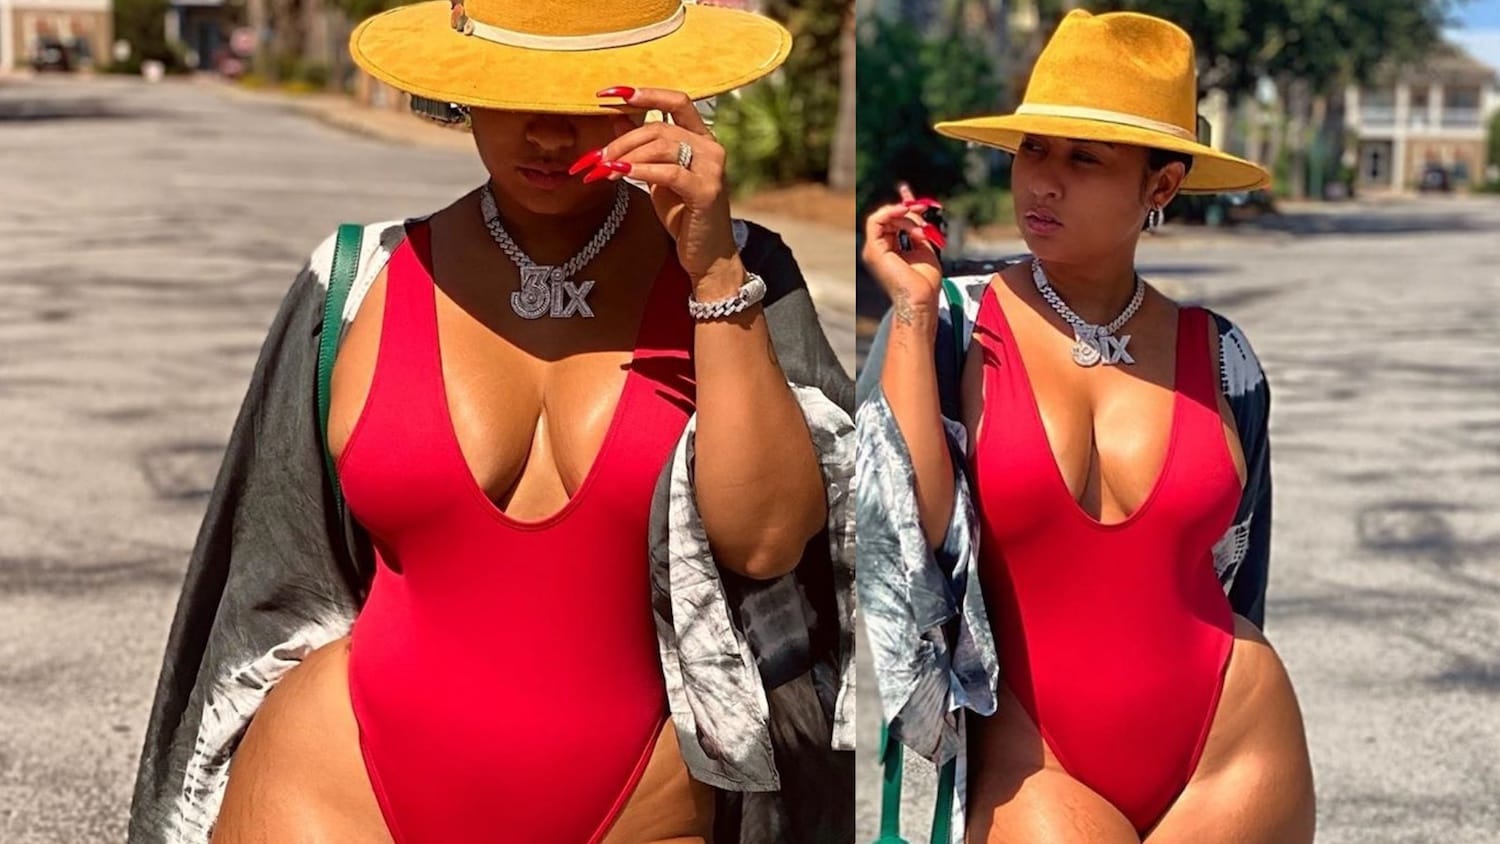 Tammy Rivera Shows Off Her Busty Body & Stretch Marks In Swimsuit.